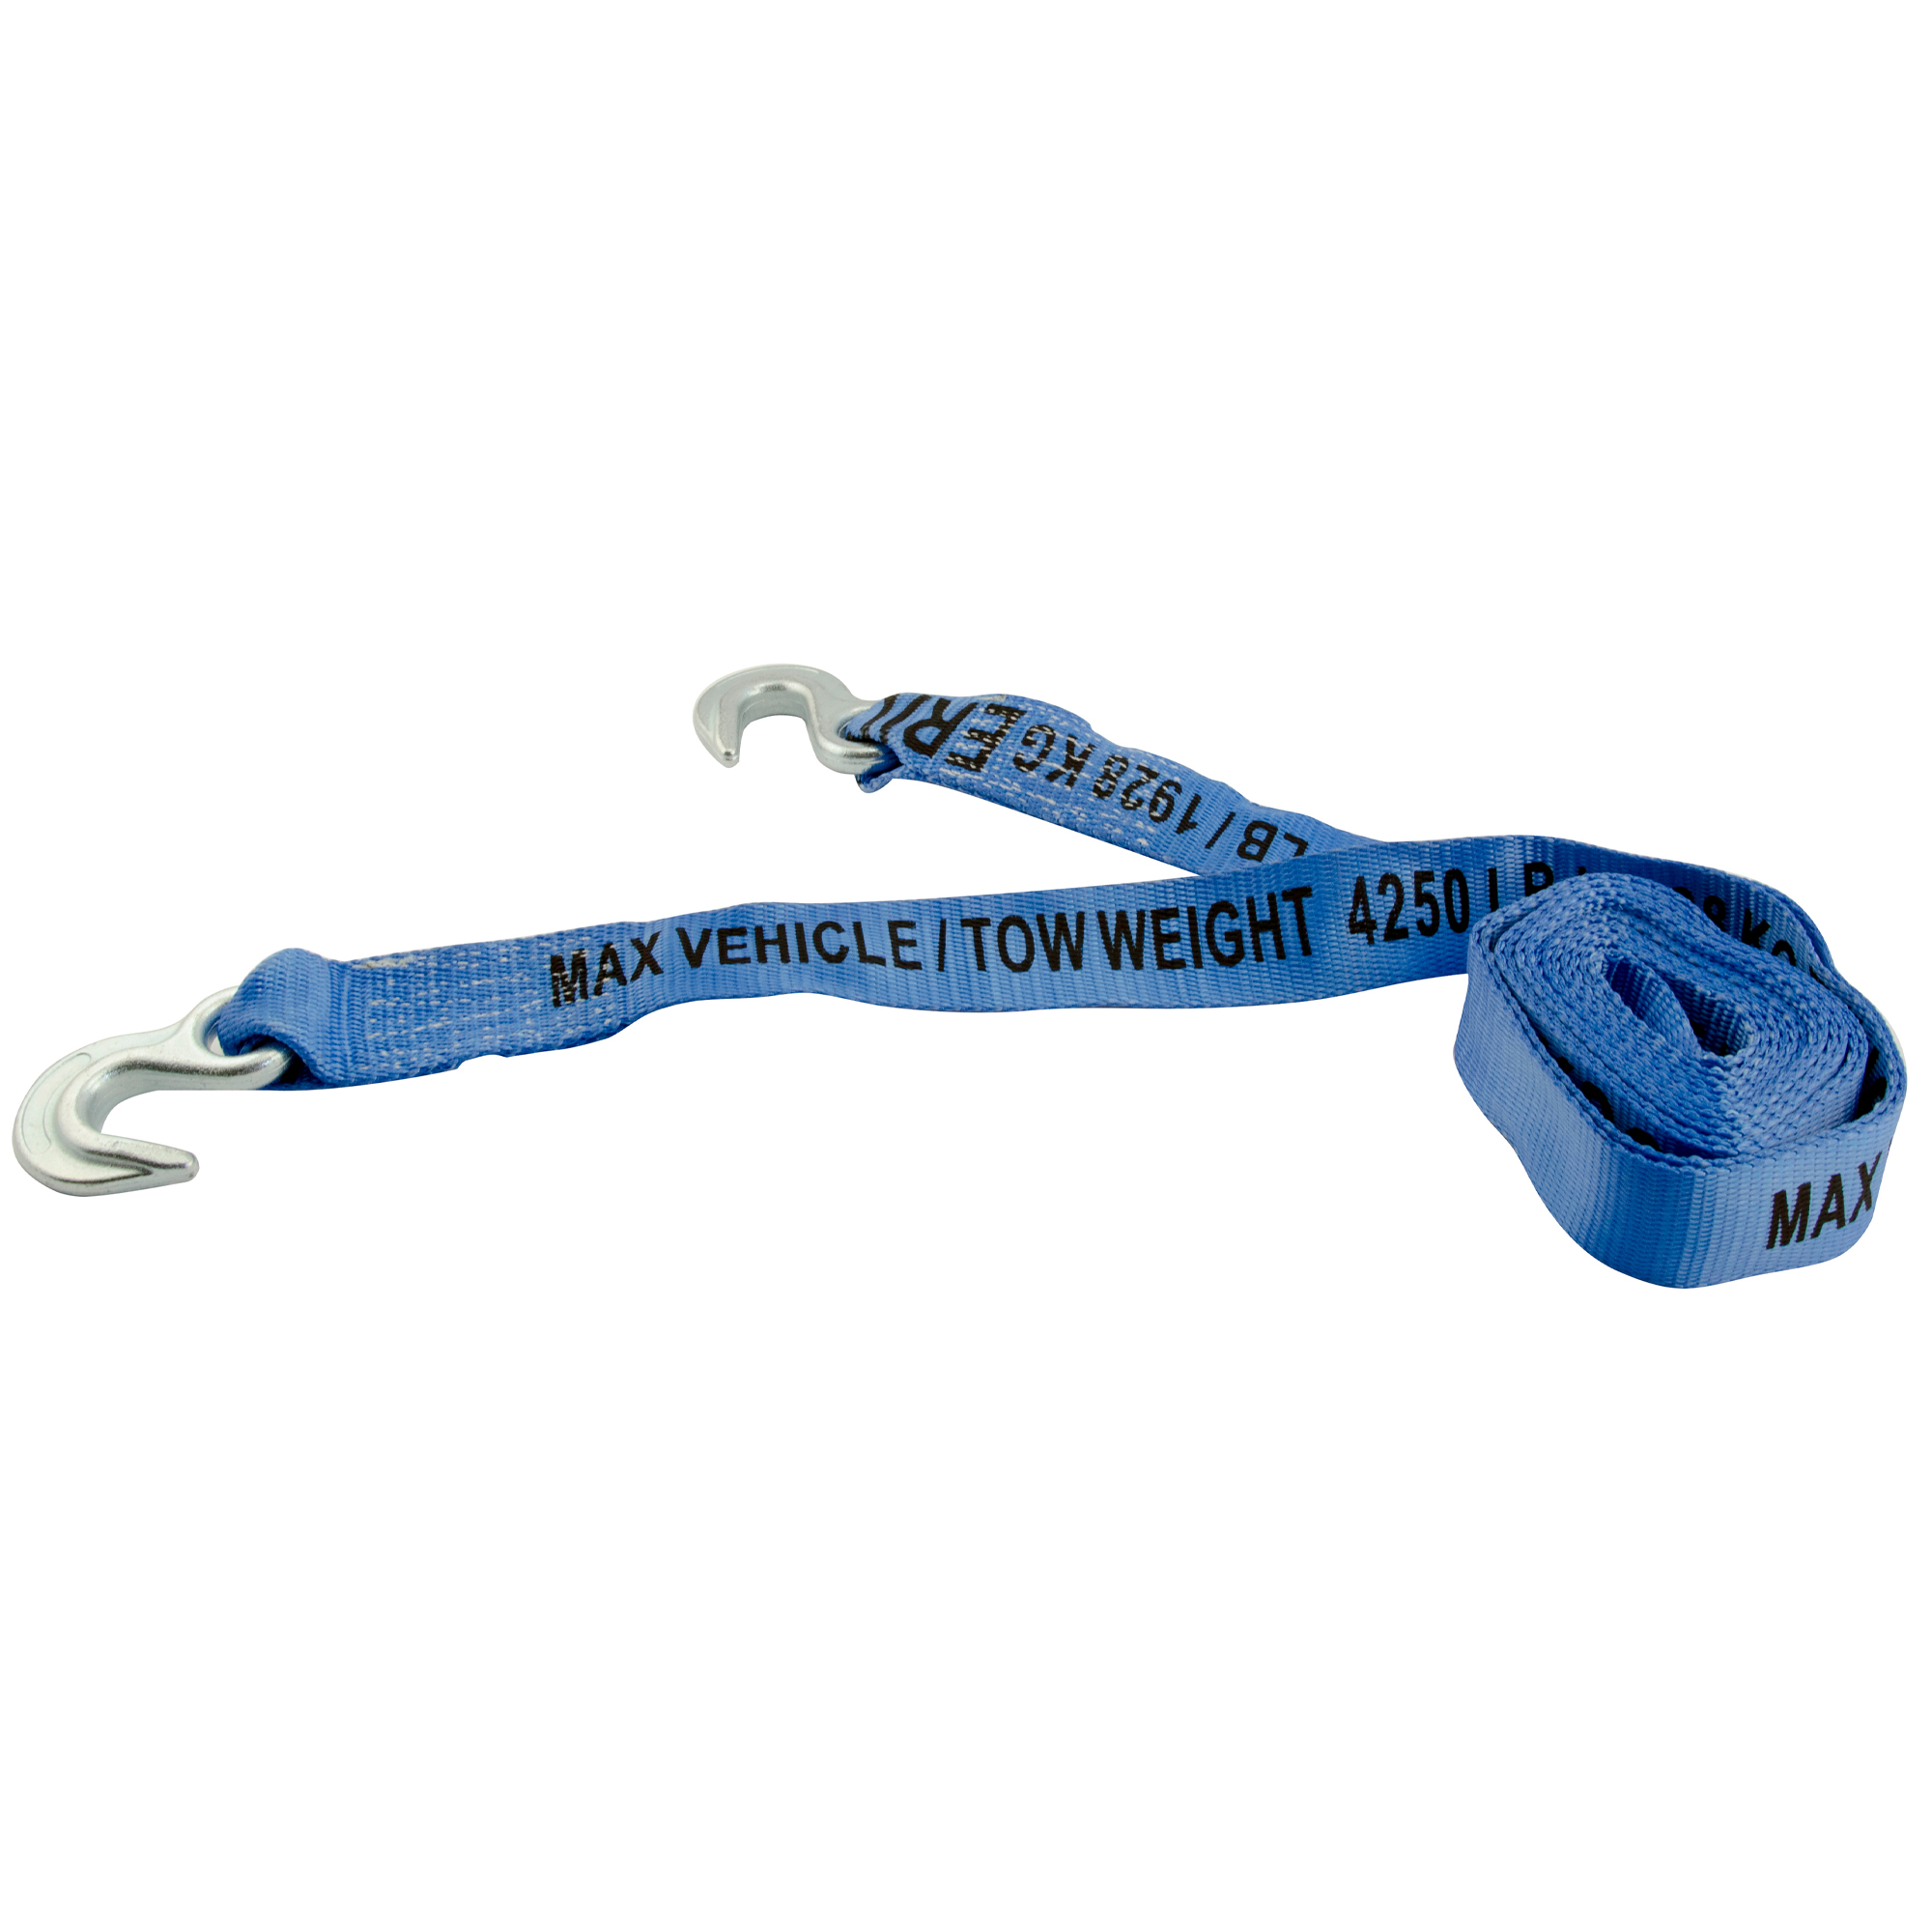 ERICKSON 59200 Tow Strap, Zinc Plated, Specifications: 8500 lb Breaking Strength, 4250 lb Vehicle Strength, Polyester, Blue